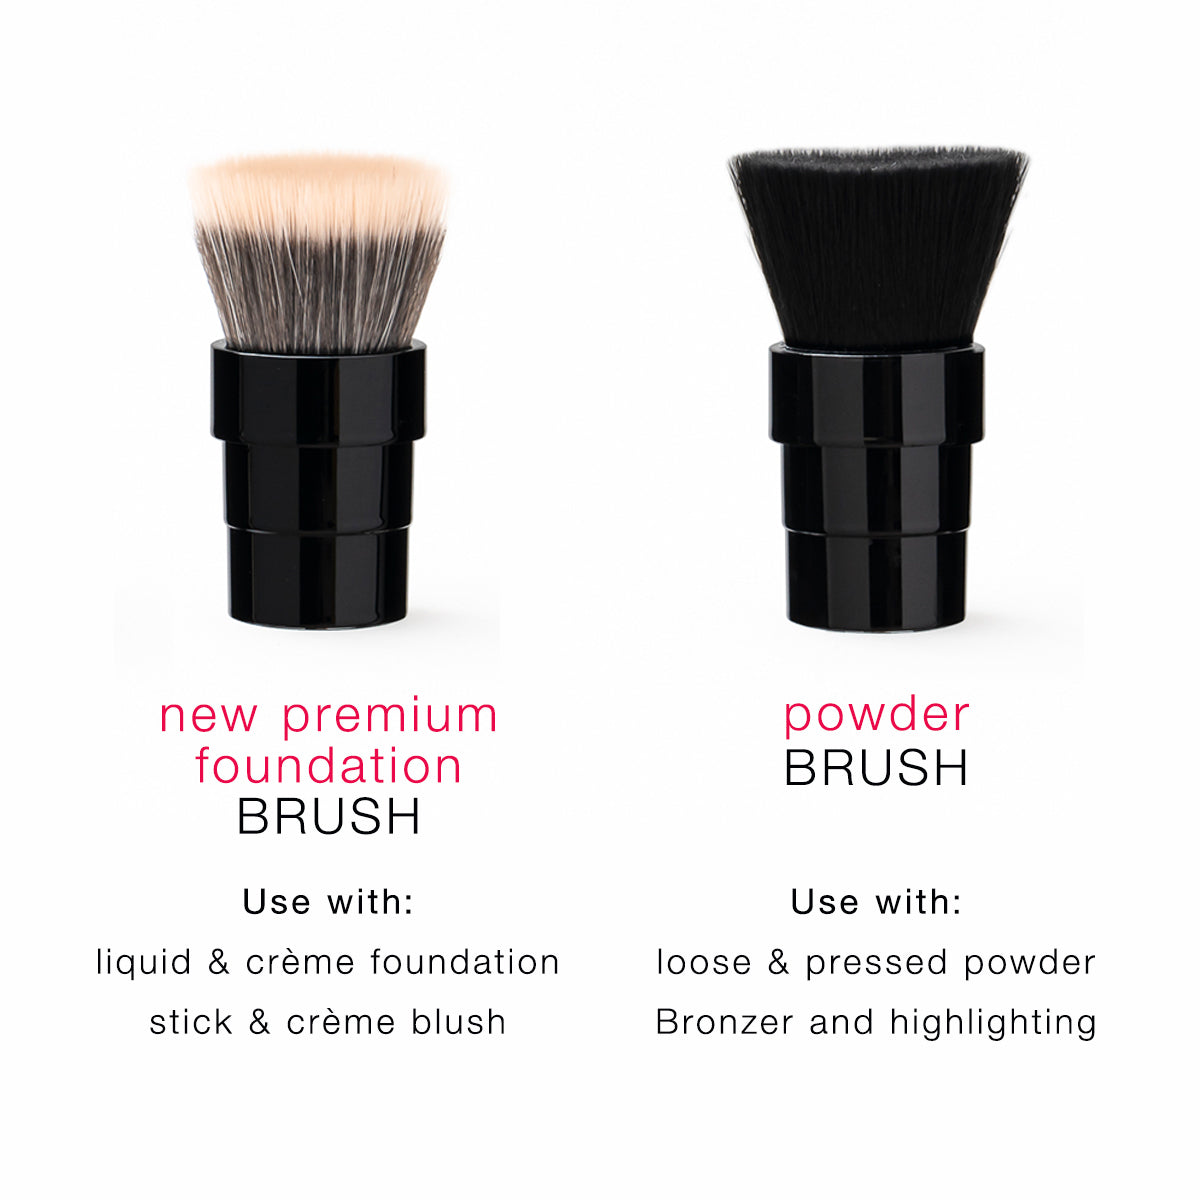 blendSMART Smooth & Even Beauty with 2 Rotating Brushes